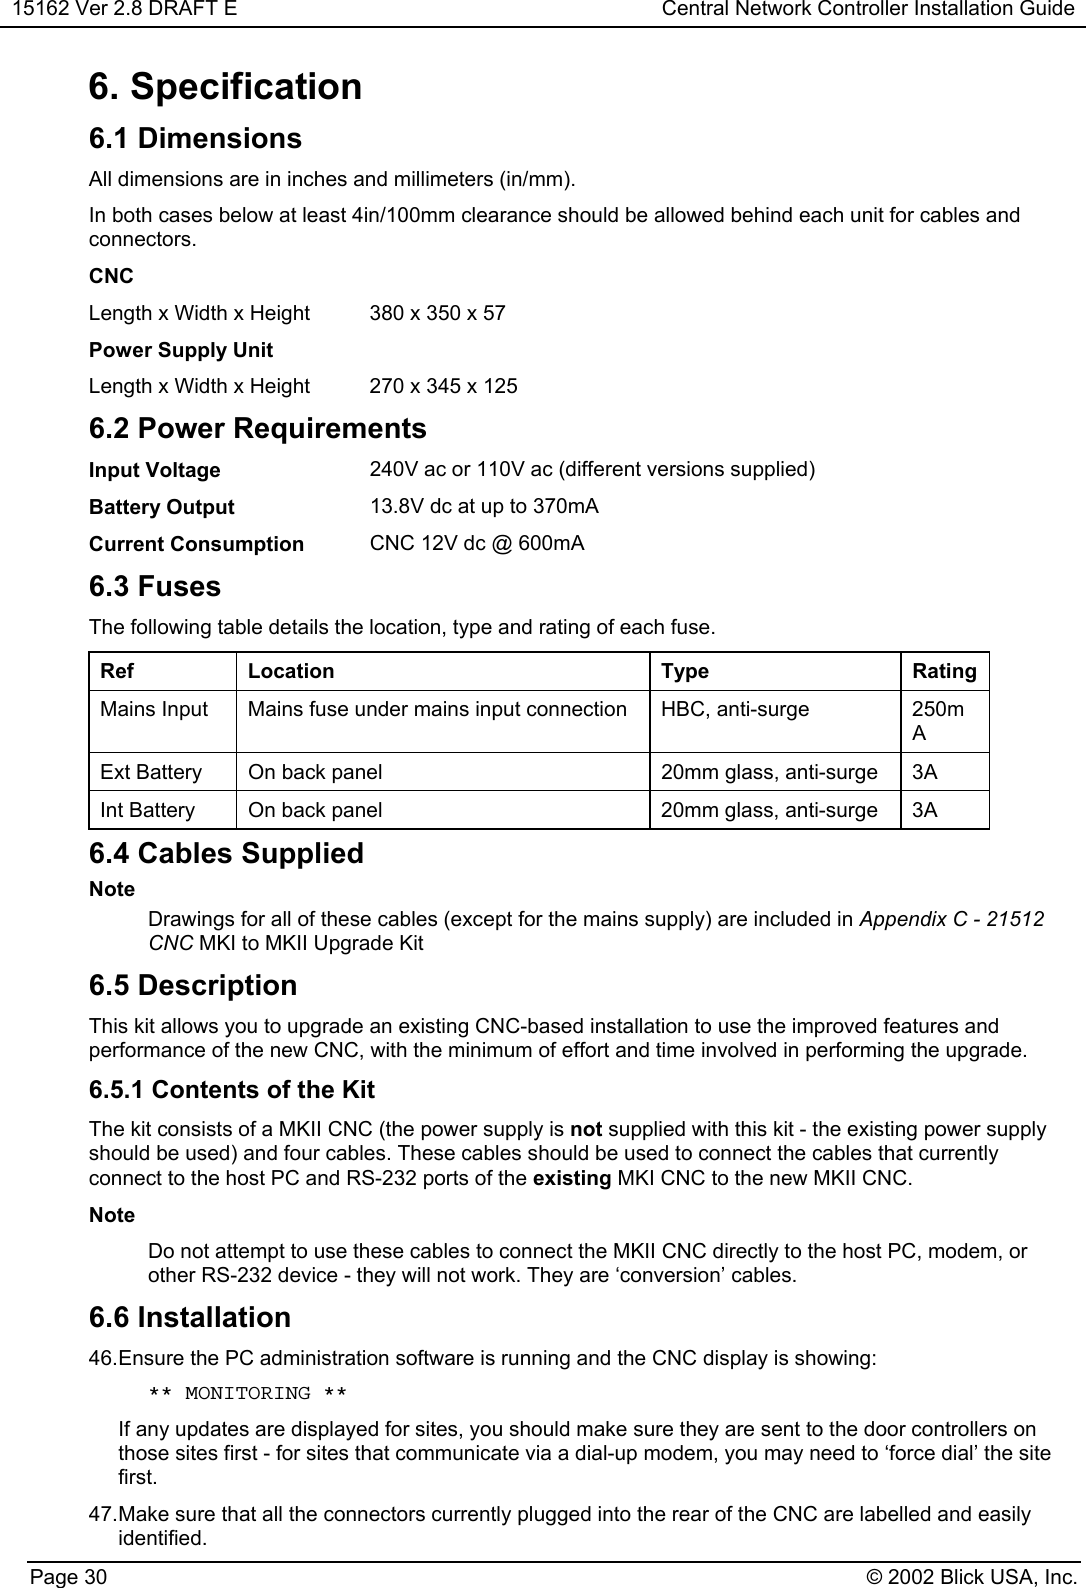 15162 Ver 2.8 DRAFT E Central Network Controller Installation GuidePage 30 © 2002 Blick USA, Inc.6. Specification6.1 DimensionsAll dimensions are in inches and millimeters (in/mm).In both cases below at least 4in/100mm clearance should be allowed behind each unit for cables andconnectors.CNCLength x Width x Height 380 x 350 x 57Power Supply UnitLength x Width x Height 270 x 345 x 1256.2 Power RequirementsInput Voltage 240V ac or 110V ac (different versions supplied)Battery Output 13.8V dc at up to 370mACurrent Consumption CNC 12V dc @ 600mA6.3 FusesThe following table details the location, type and rating of each fuse.Ref Location Type RatingMains Input Mains fuse under mains input connection HBC, anti-surge 250mAExt Battery On back panel 20mm glass, anti-surge 3AInt Battery On back panel 20mm glass, anti-surge 3A6.4 Cables SuppliedNoteDrawings for all of these cables (except for the mains supply) are included in Appendix C - 21512CNC MKI to MKII Upgrade Kit6.5 DescriptionThis kit allows you to upgrade an existing CNC-based installation to use the improved features andperformance of the new CNC, with the minimum of effort and time involved in performing the upgrade.6.5.1 Contents of the KitThe kit consists of a MKII CNC (the power supply is not supplied with this kit - the existing power supplyshould be used) and four cables. These cables should be used to connect the cables that currentlyconnect to the host PC and RS-232 ports of the existing MKI CNC to the new MKII CNC.NoteDo not attempt to use these cables to connect the MKII CNC directly to the host PC, modem, orother RS-232 device - they will not work. They are ‘conversion’ cables.6.6 Installation46. Ensure the PC administration software is running and the CNC display is showing: ** MONITORING **If any updates are displayed for sites, you should make sure they are sent to the door controllers onthose sites first - for sites that communicate via a dial-up modem, you may need to ‘force dial’ the sitefirst.47. Make sure that all the connectors currently plugged into the rear of the CNC are labelled and easilyidentified.